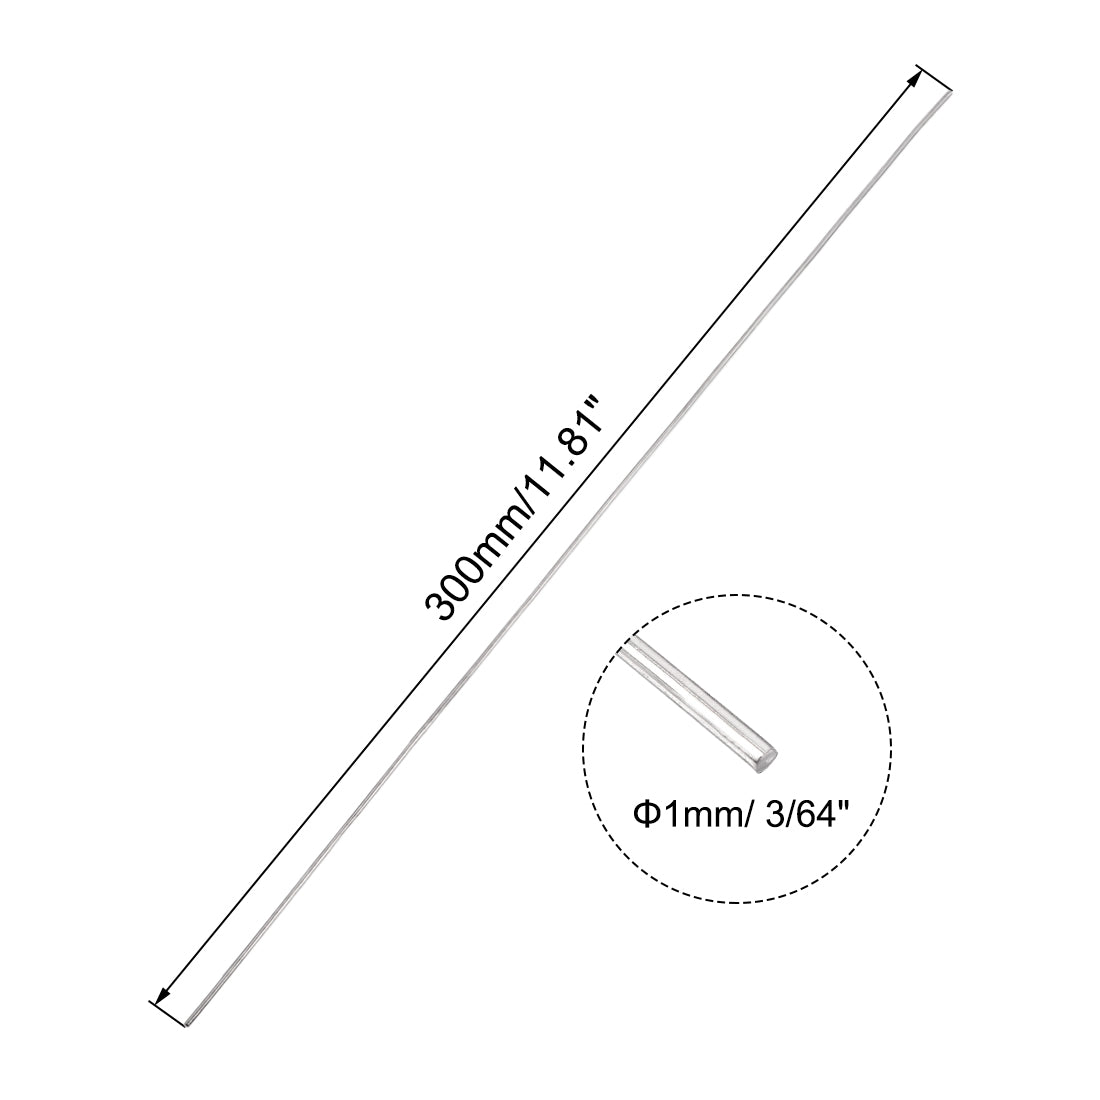 uxcell Uxcell Stainless Steel Support Rod for DIY Model